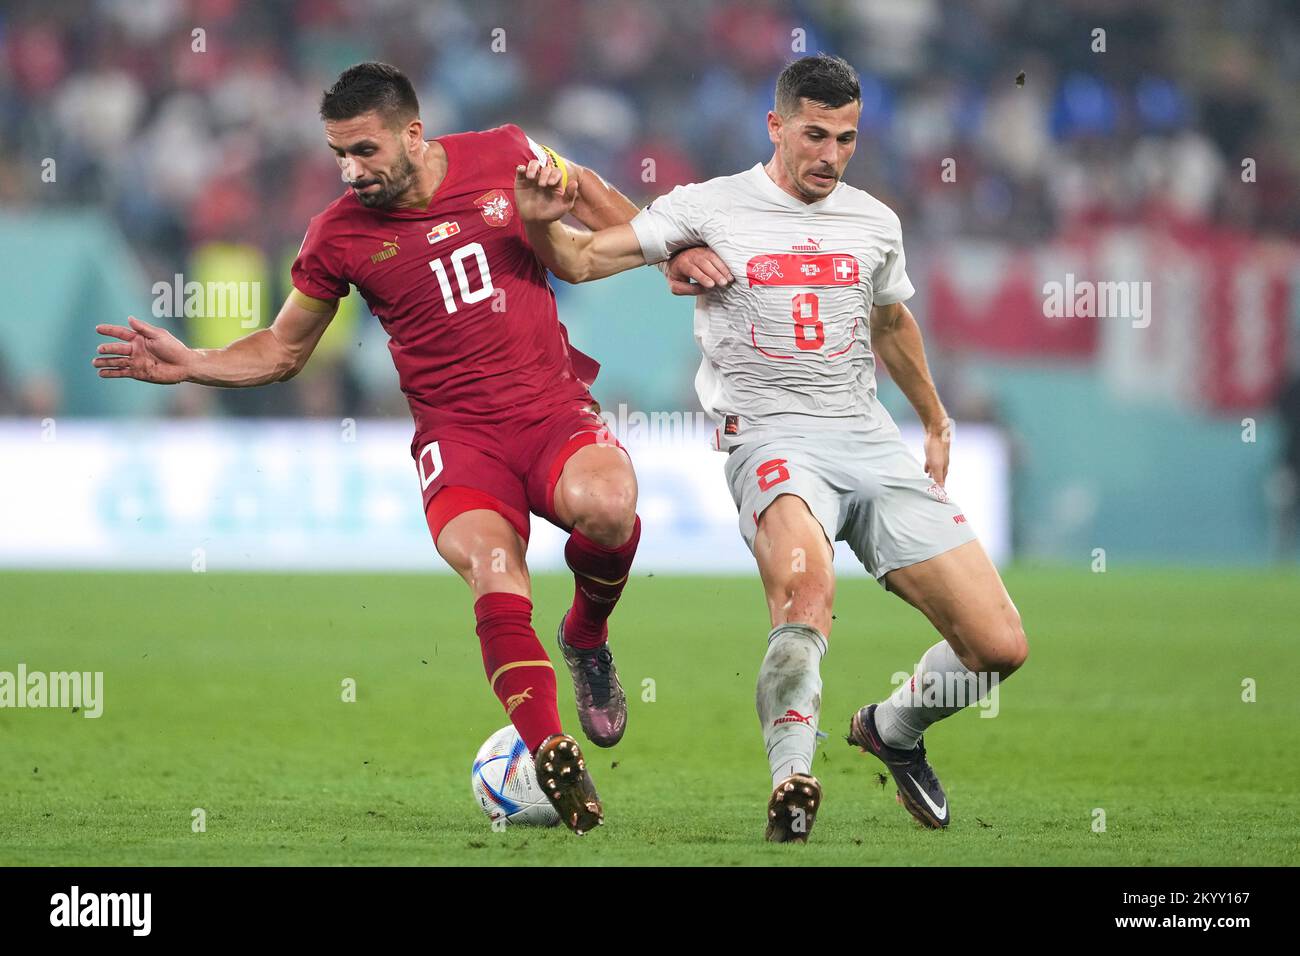 Doha, Qatar. 2nd Dec, 2022. Dusan Tadic (L) of Serbia vies with Remo Freuler of Switzerland during their Group G match at the 2022 FIFA World Cup at Stadium 974 in Doha, Qatar, Dec. 2, 2022. Credit: Zheng Huansong/Xinhua/Alamy Live News Stock Photo